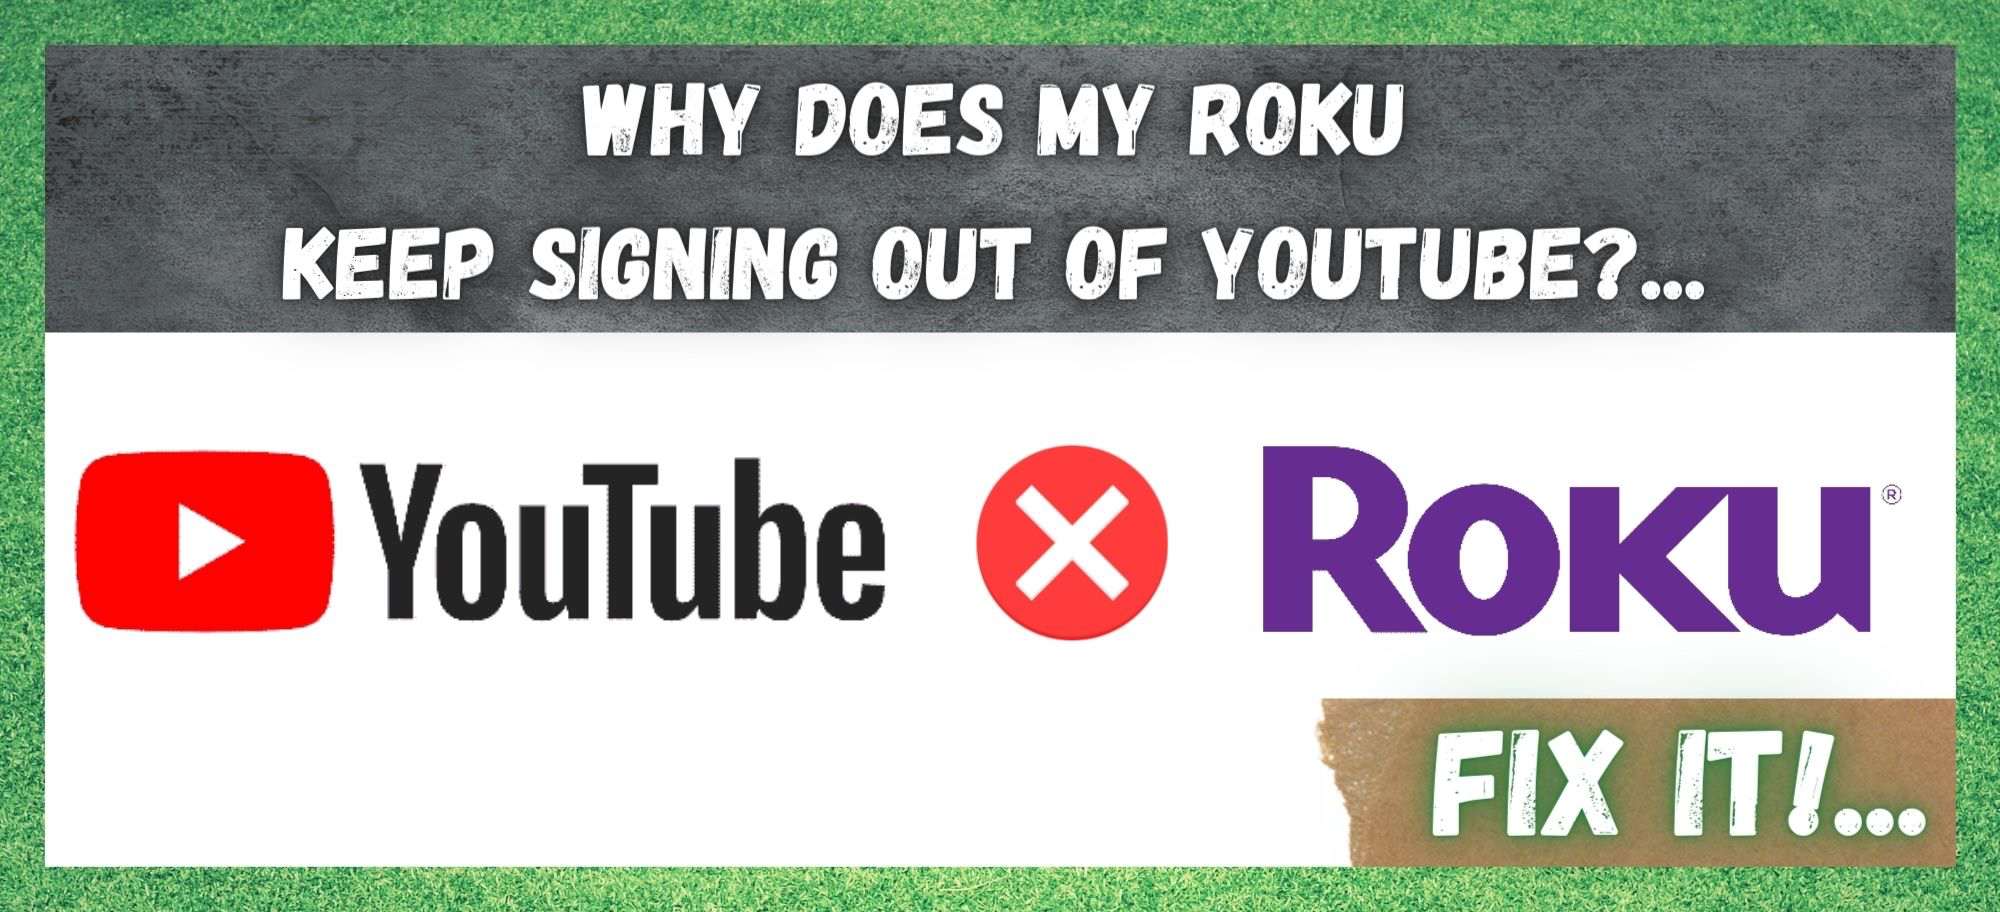 Why Does My Roku Keep Signing Out Of YouTube